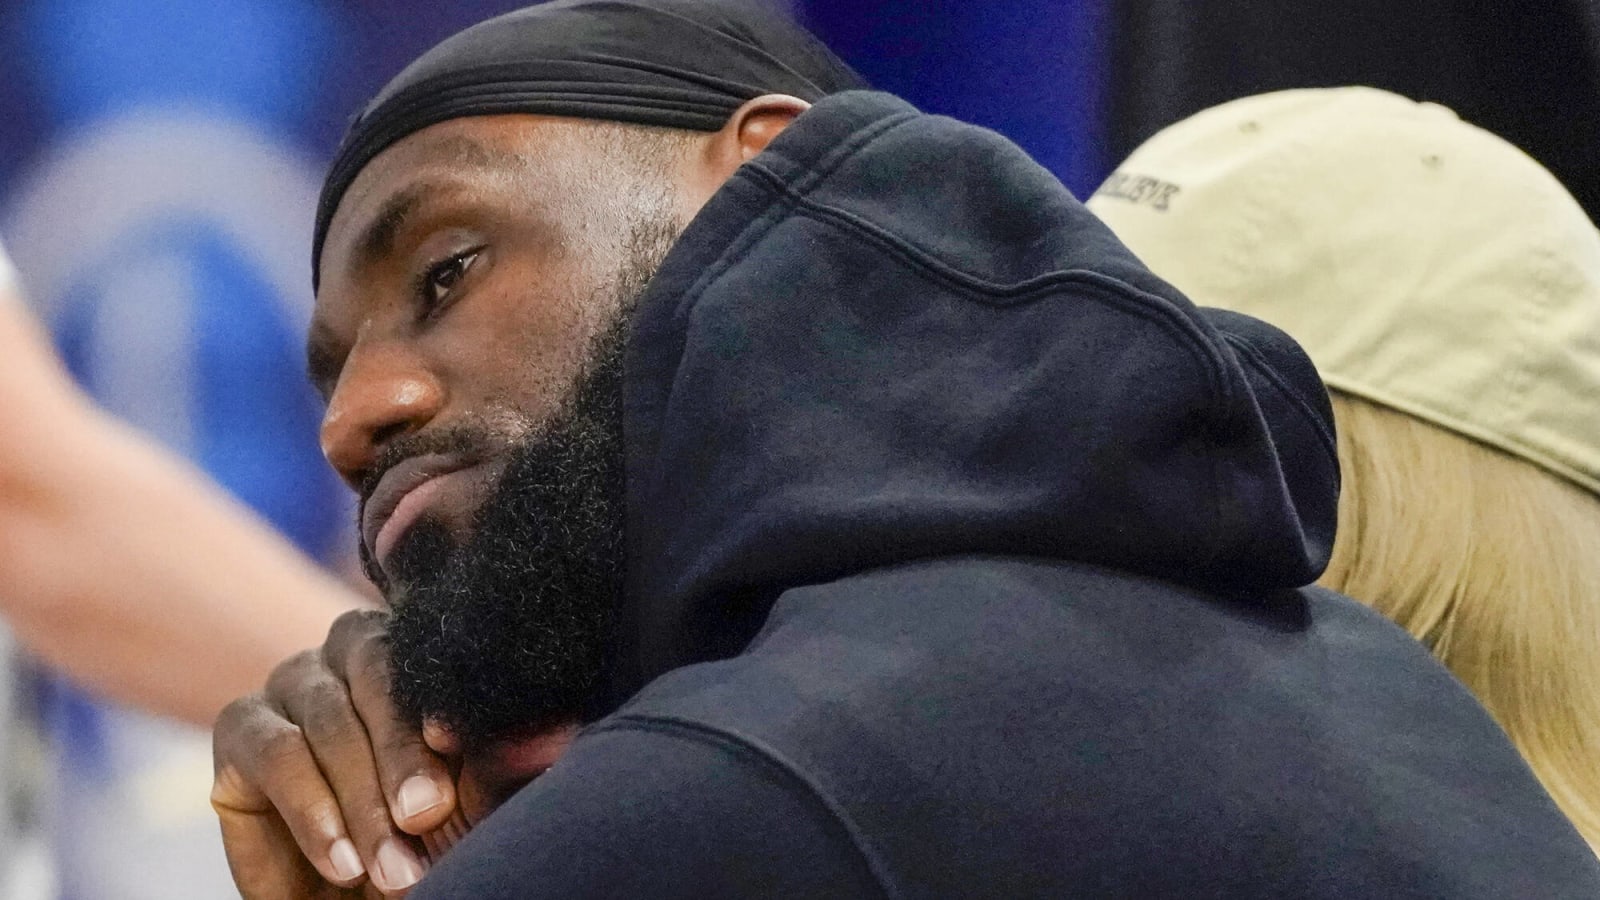 Los Angeles Lakers Star LeBron James No Longer a Superstar, Claims Former NBA Coach